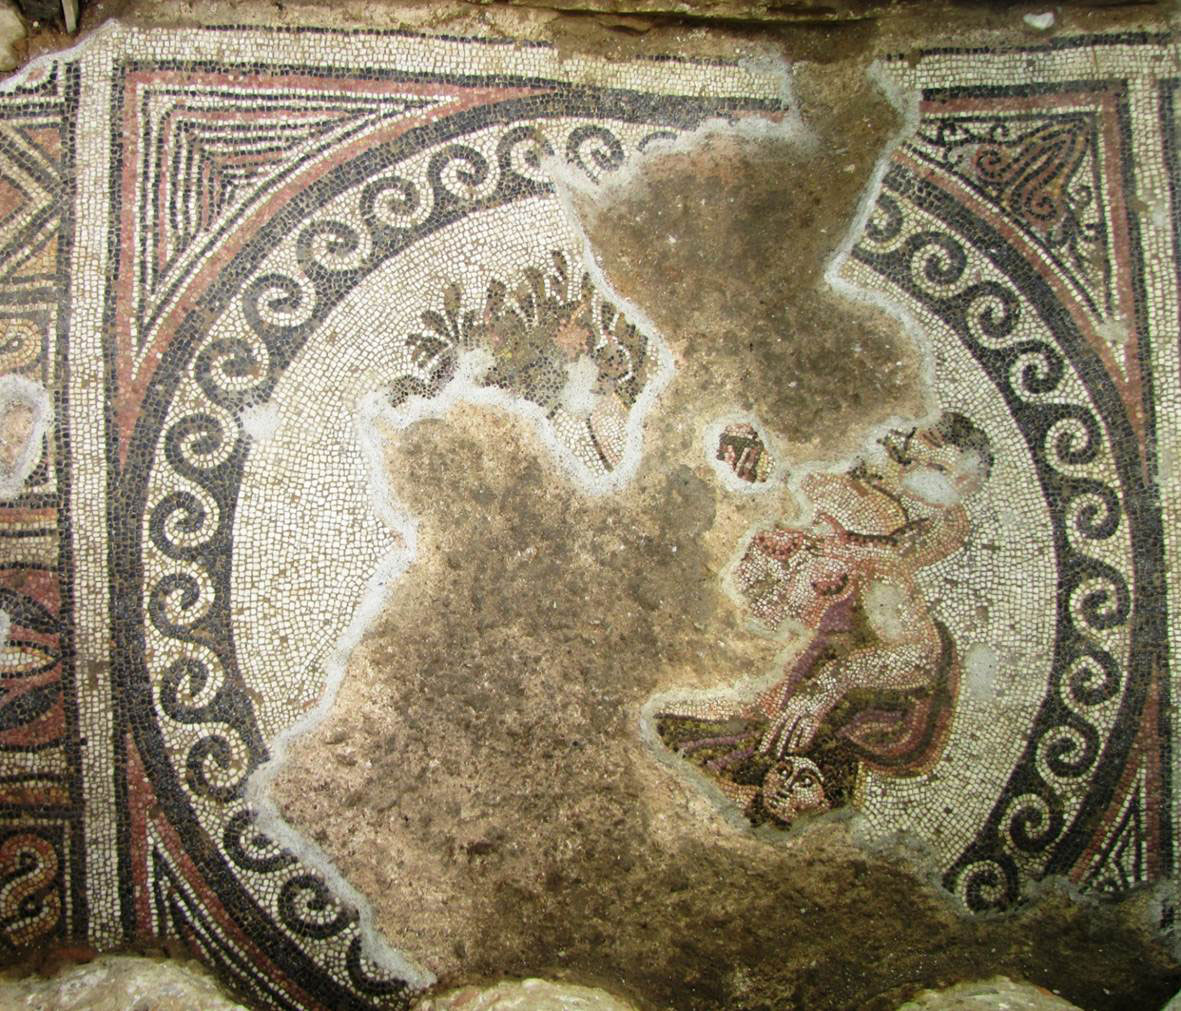 Mosaic floors dating from the 4th and 5th centuries AD, found at the south entrance of the Aghia Sophia station of the Thessaloniki Metro (photo: Ministry of Culture and Sports).